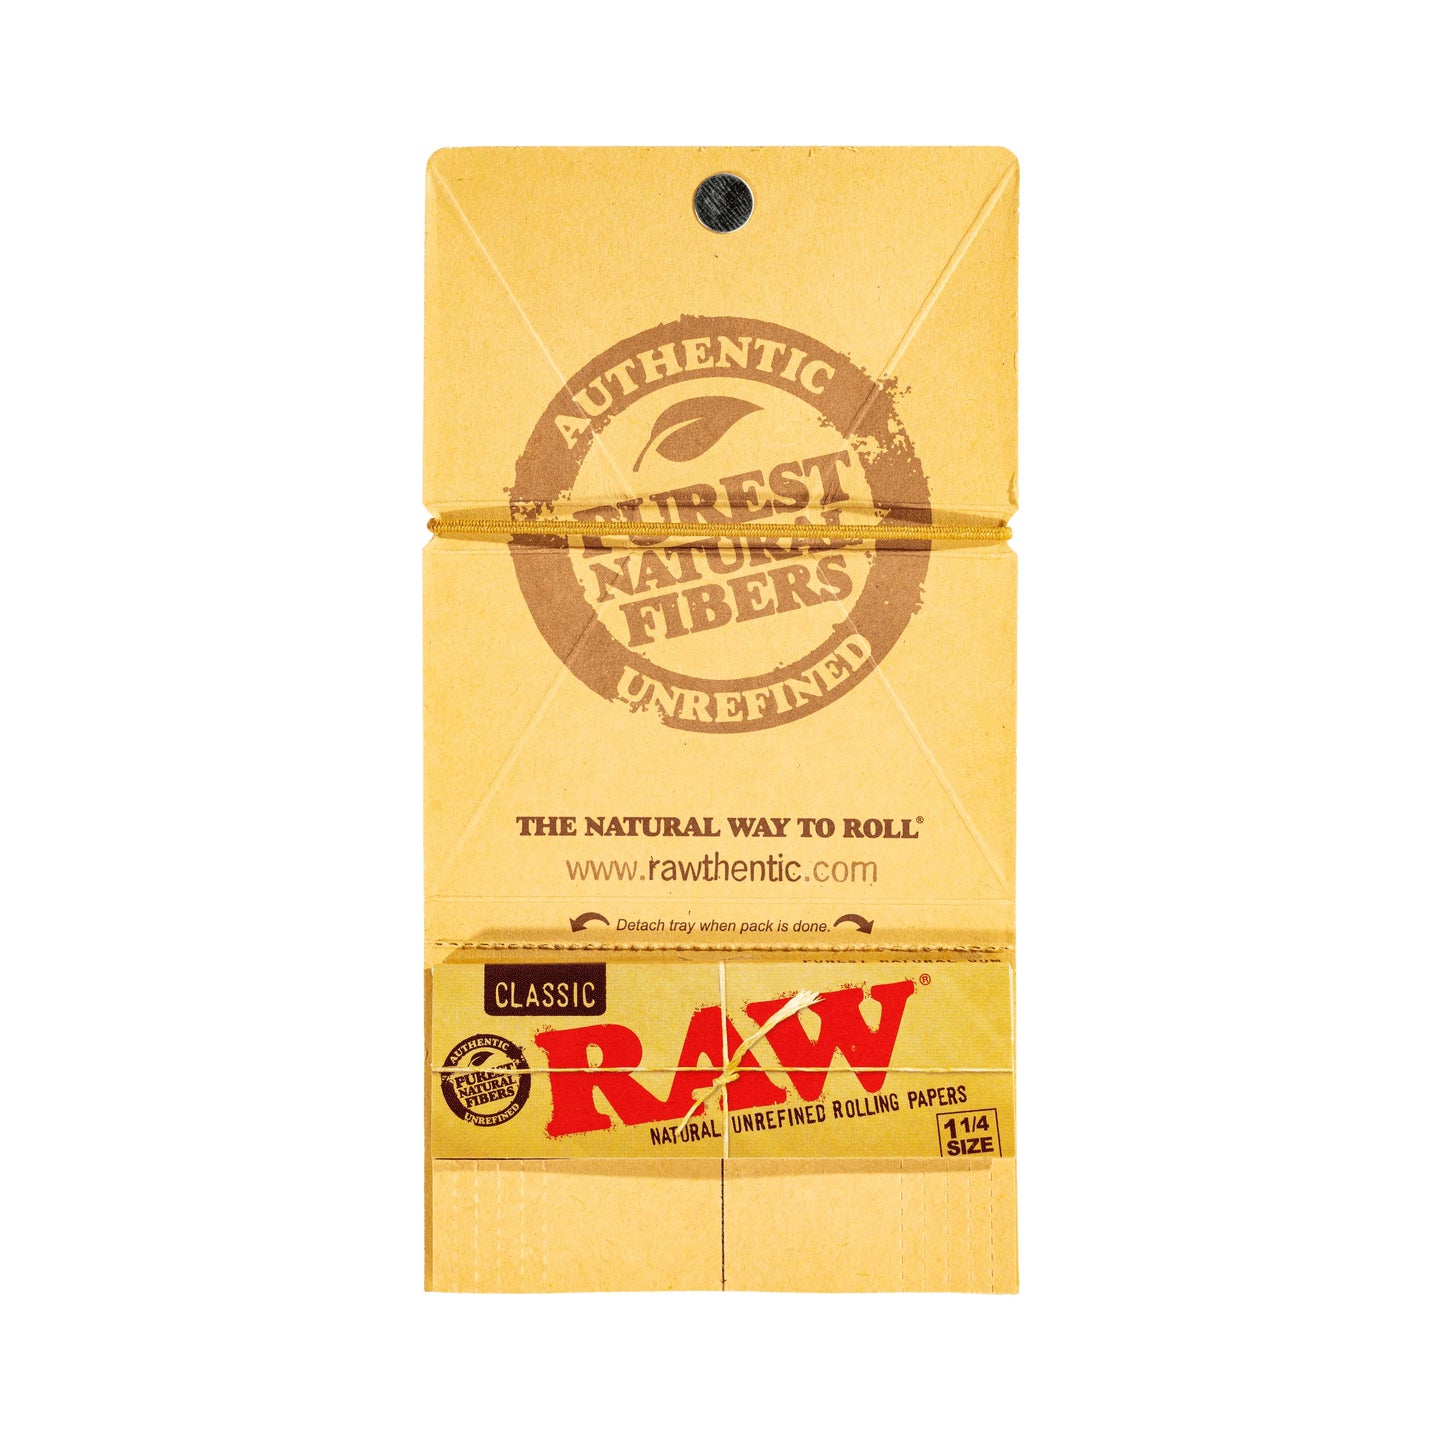 RAW Artesano Rolling Papers with Tray - Rolling Papers - RAW - Cali Tobacconist